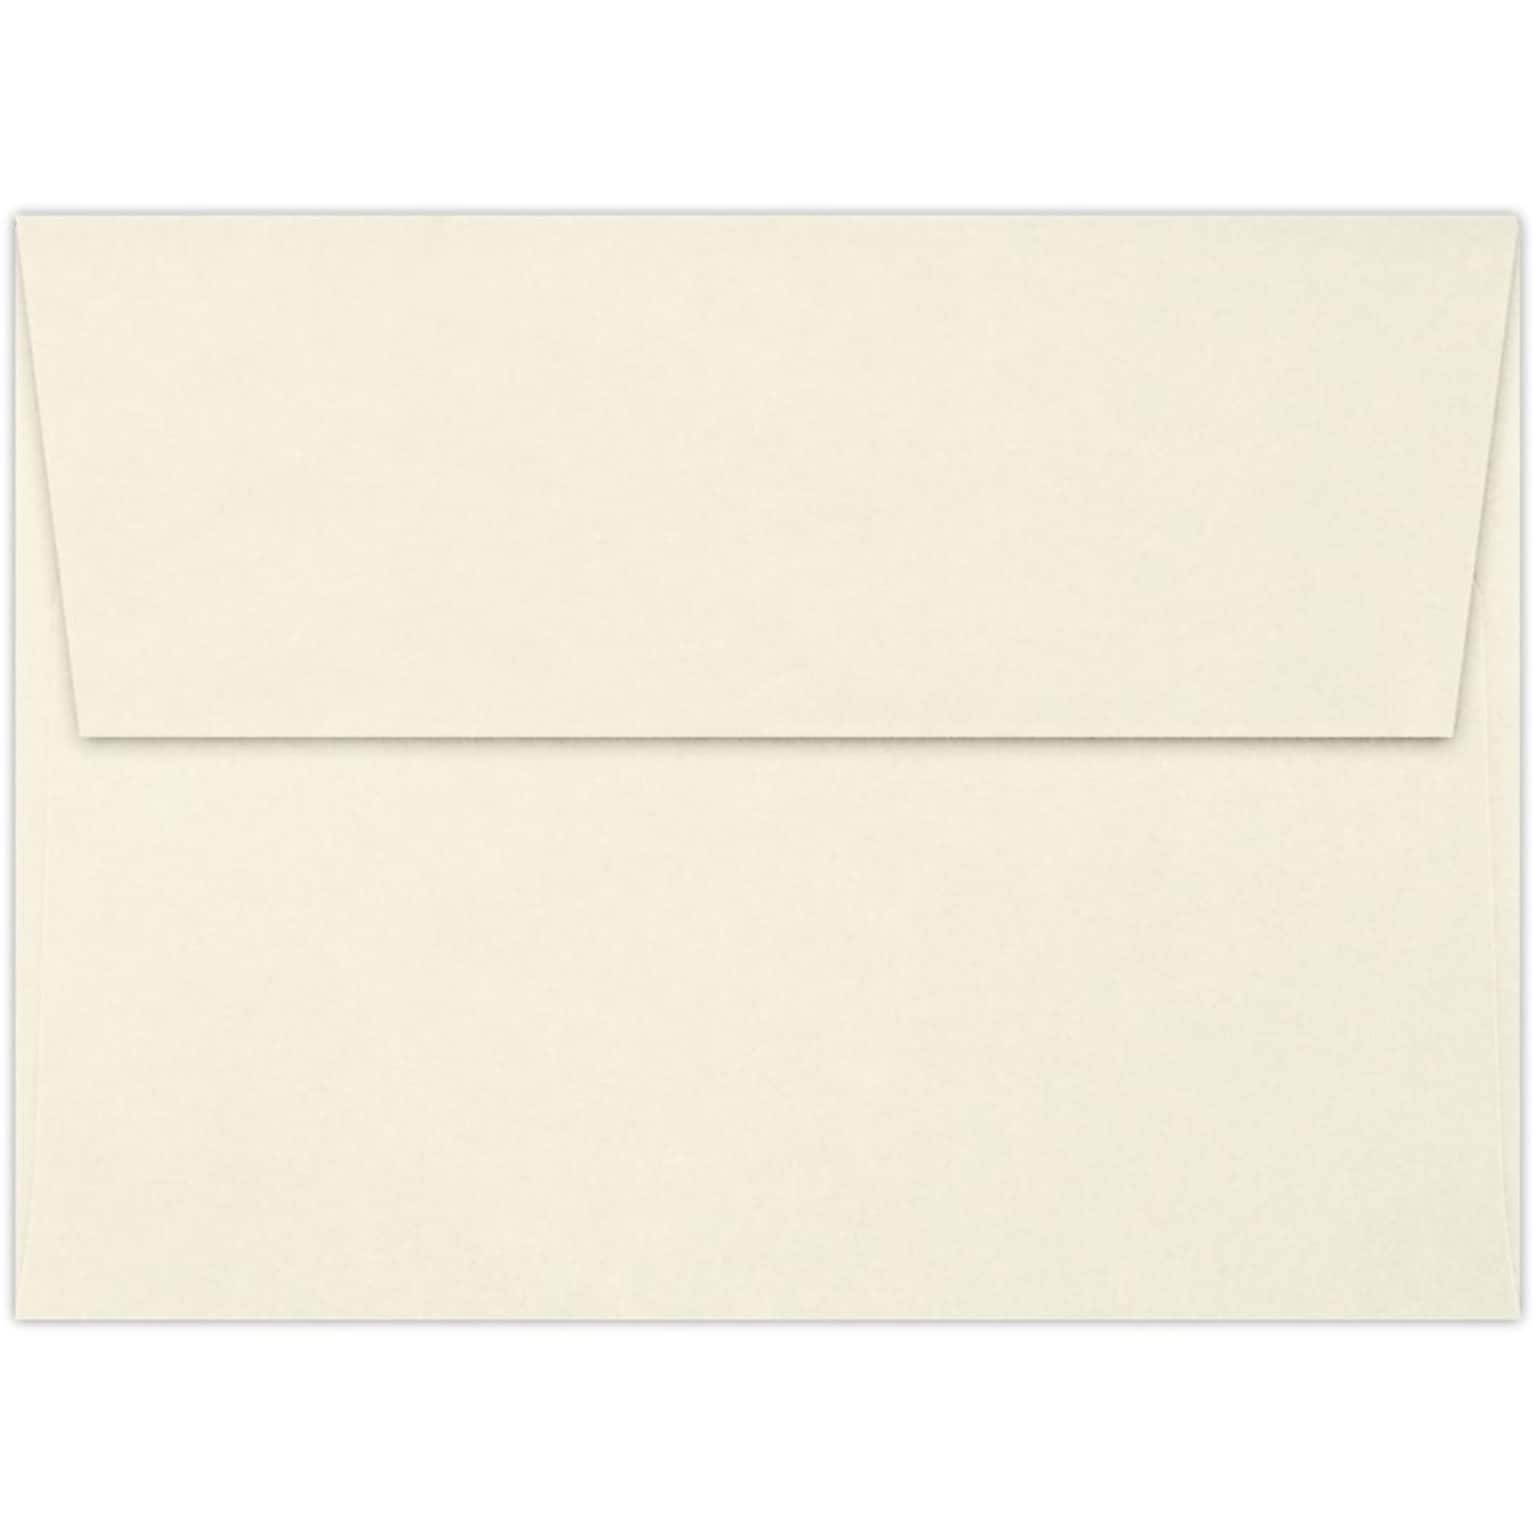 LUX A6 Invitation Envelopes (4 3/4 x 6 1/2) 500/Pack, 70lb. Classic Crest® Natural White (4875-70NW-500)